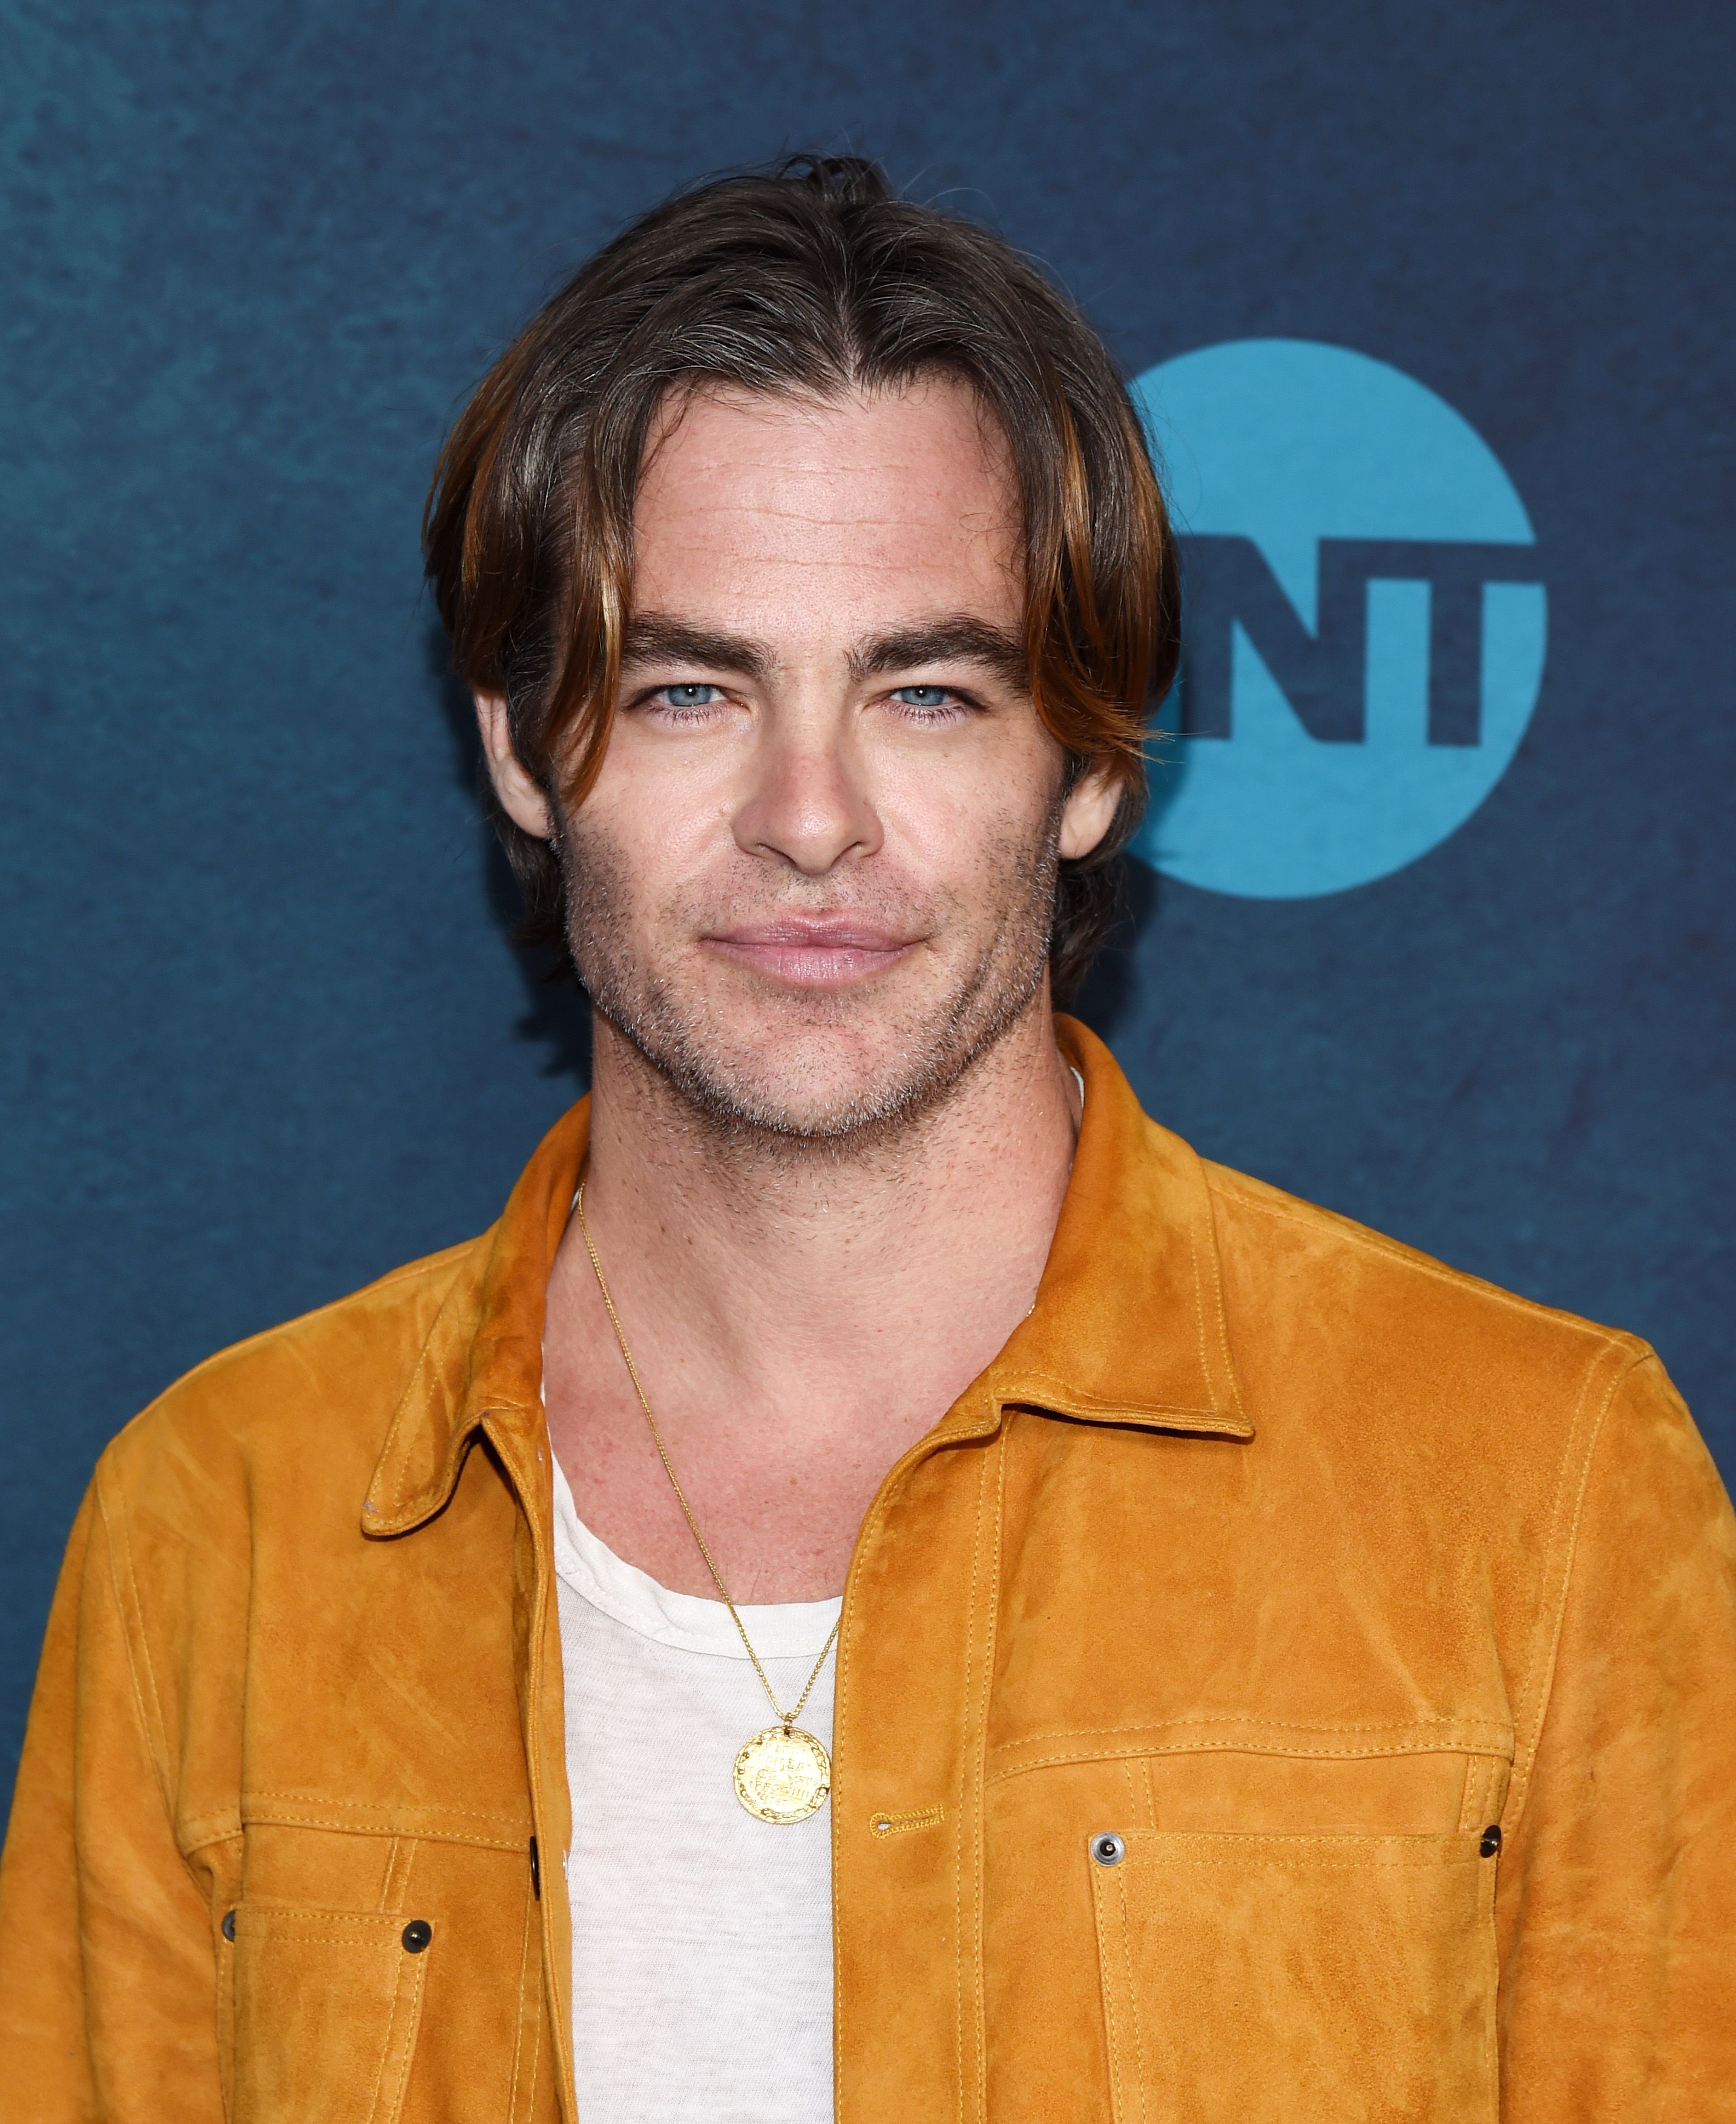 Chris Pine during the TNT's "I Am The Night" EMMY For Your Consideration Event at the Television Academy on May 09, 2019, in Los Angeles, California. | Source: Getty Images